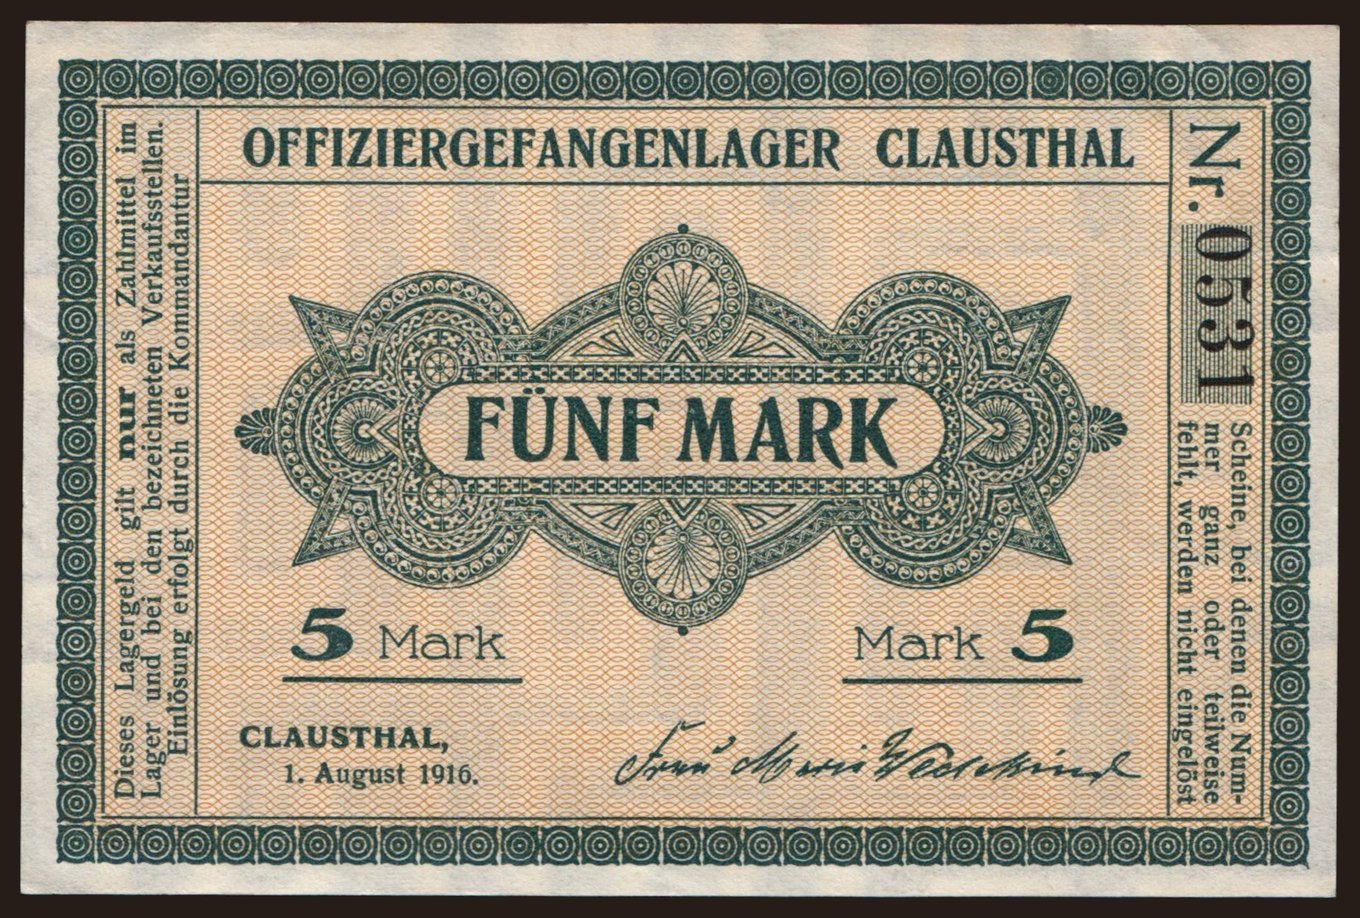 Clausthal, 5 Mark, 1916